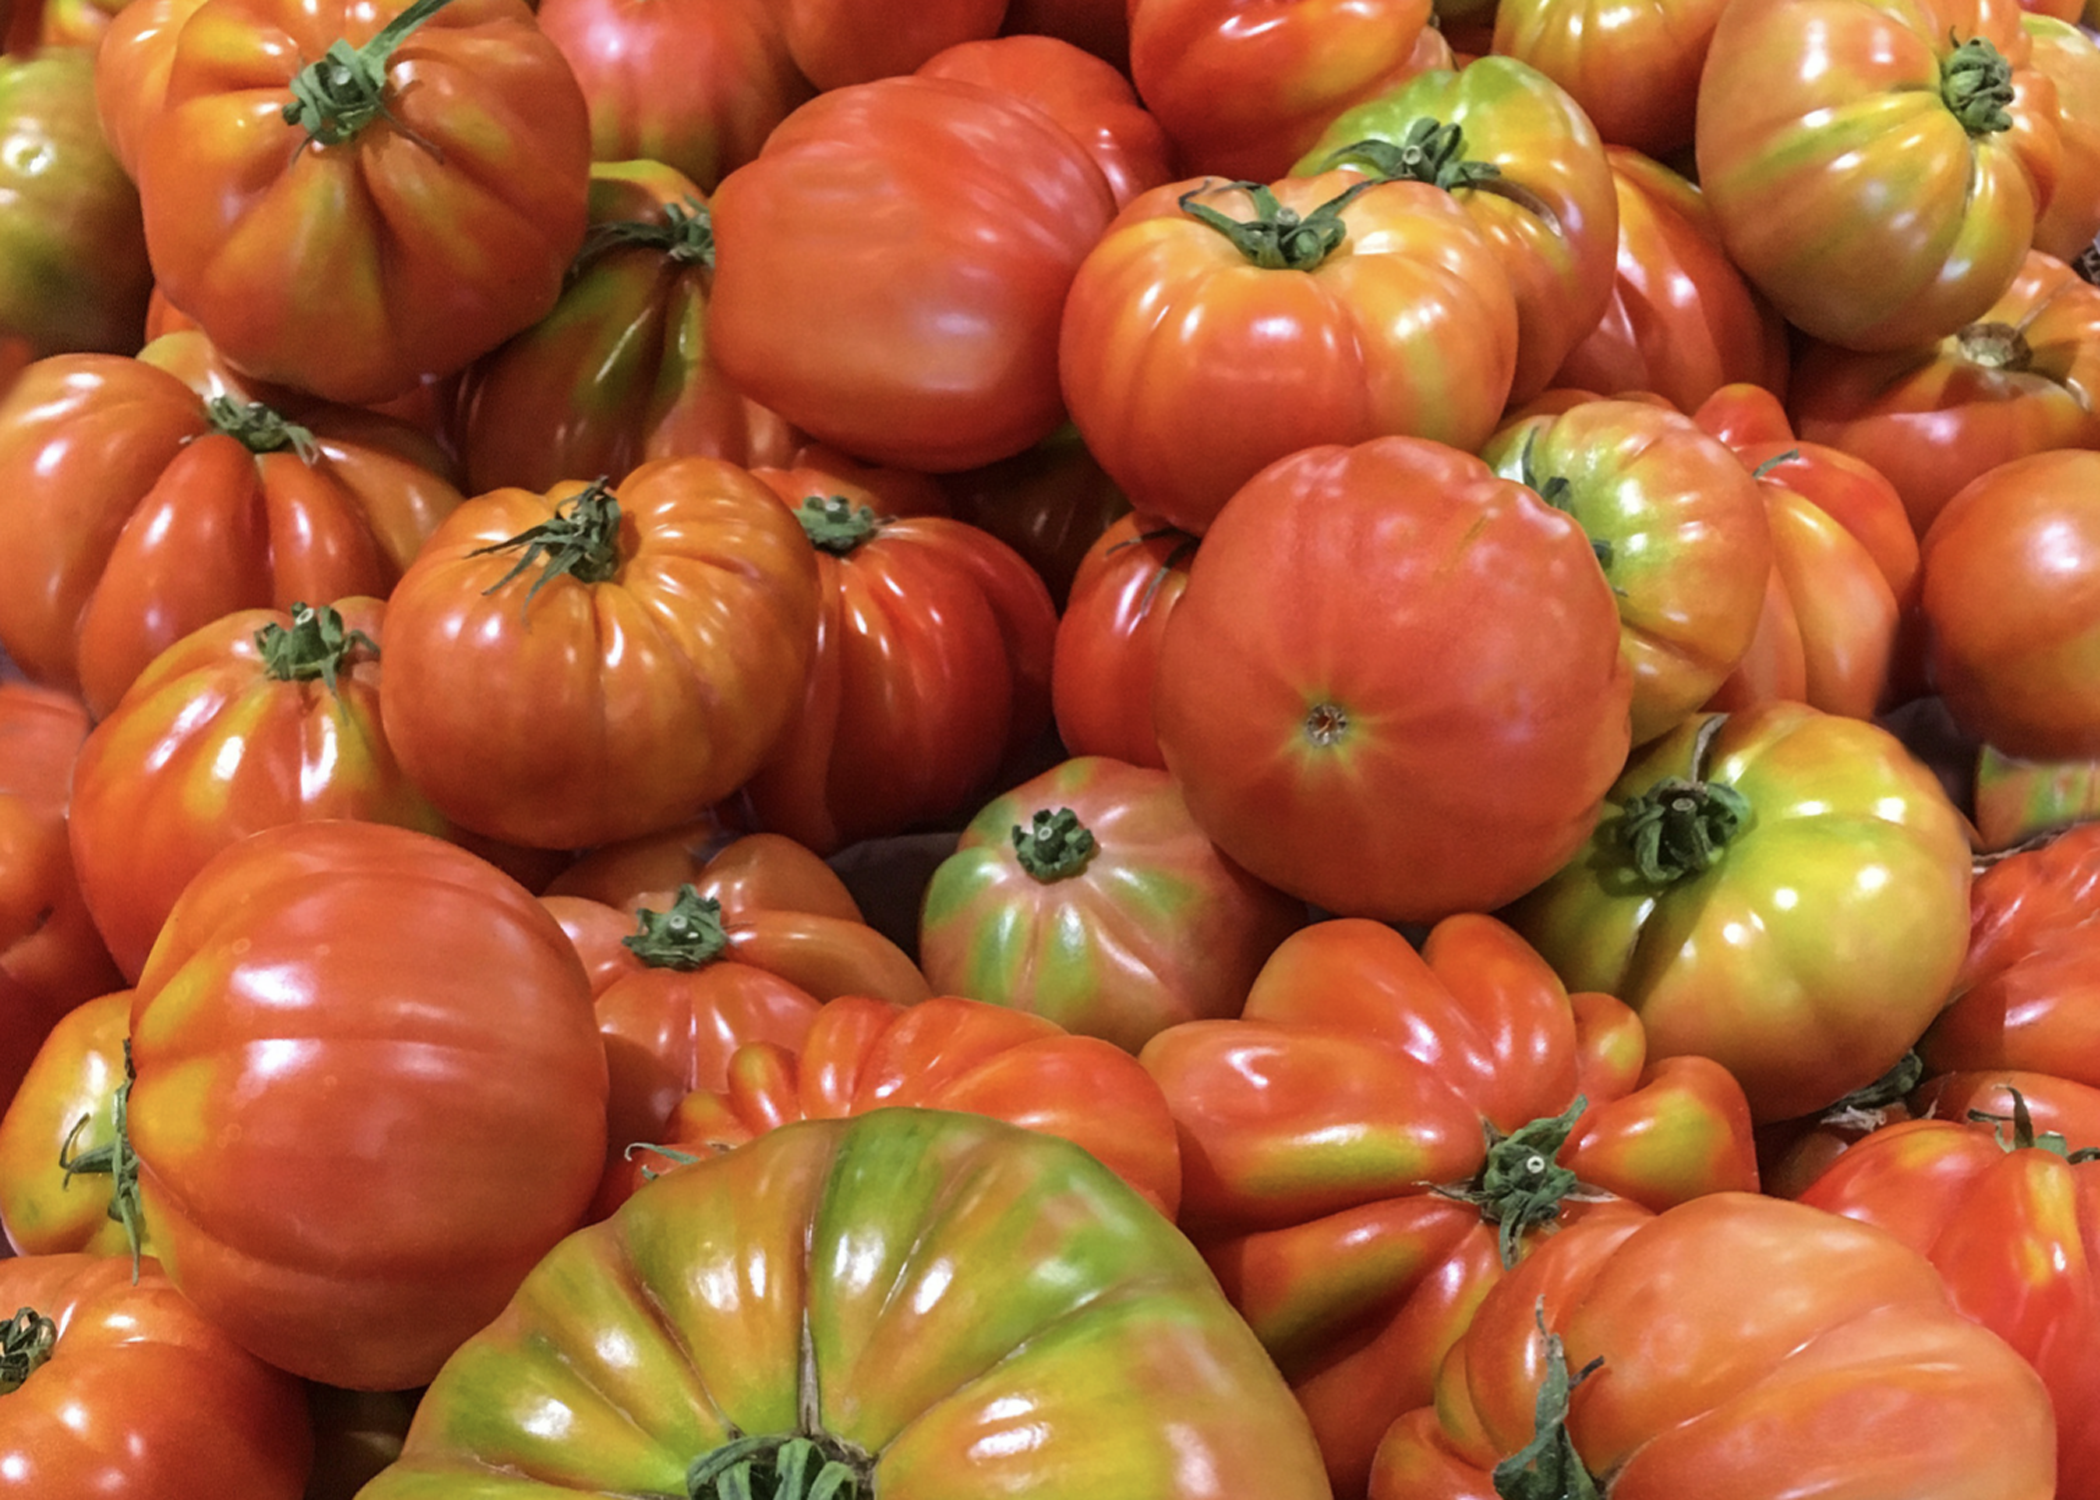 A pile of heirloom tomatoes